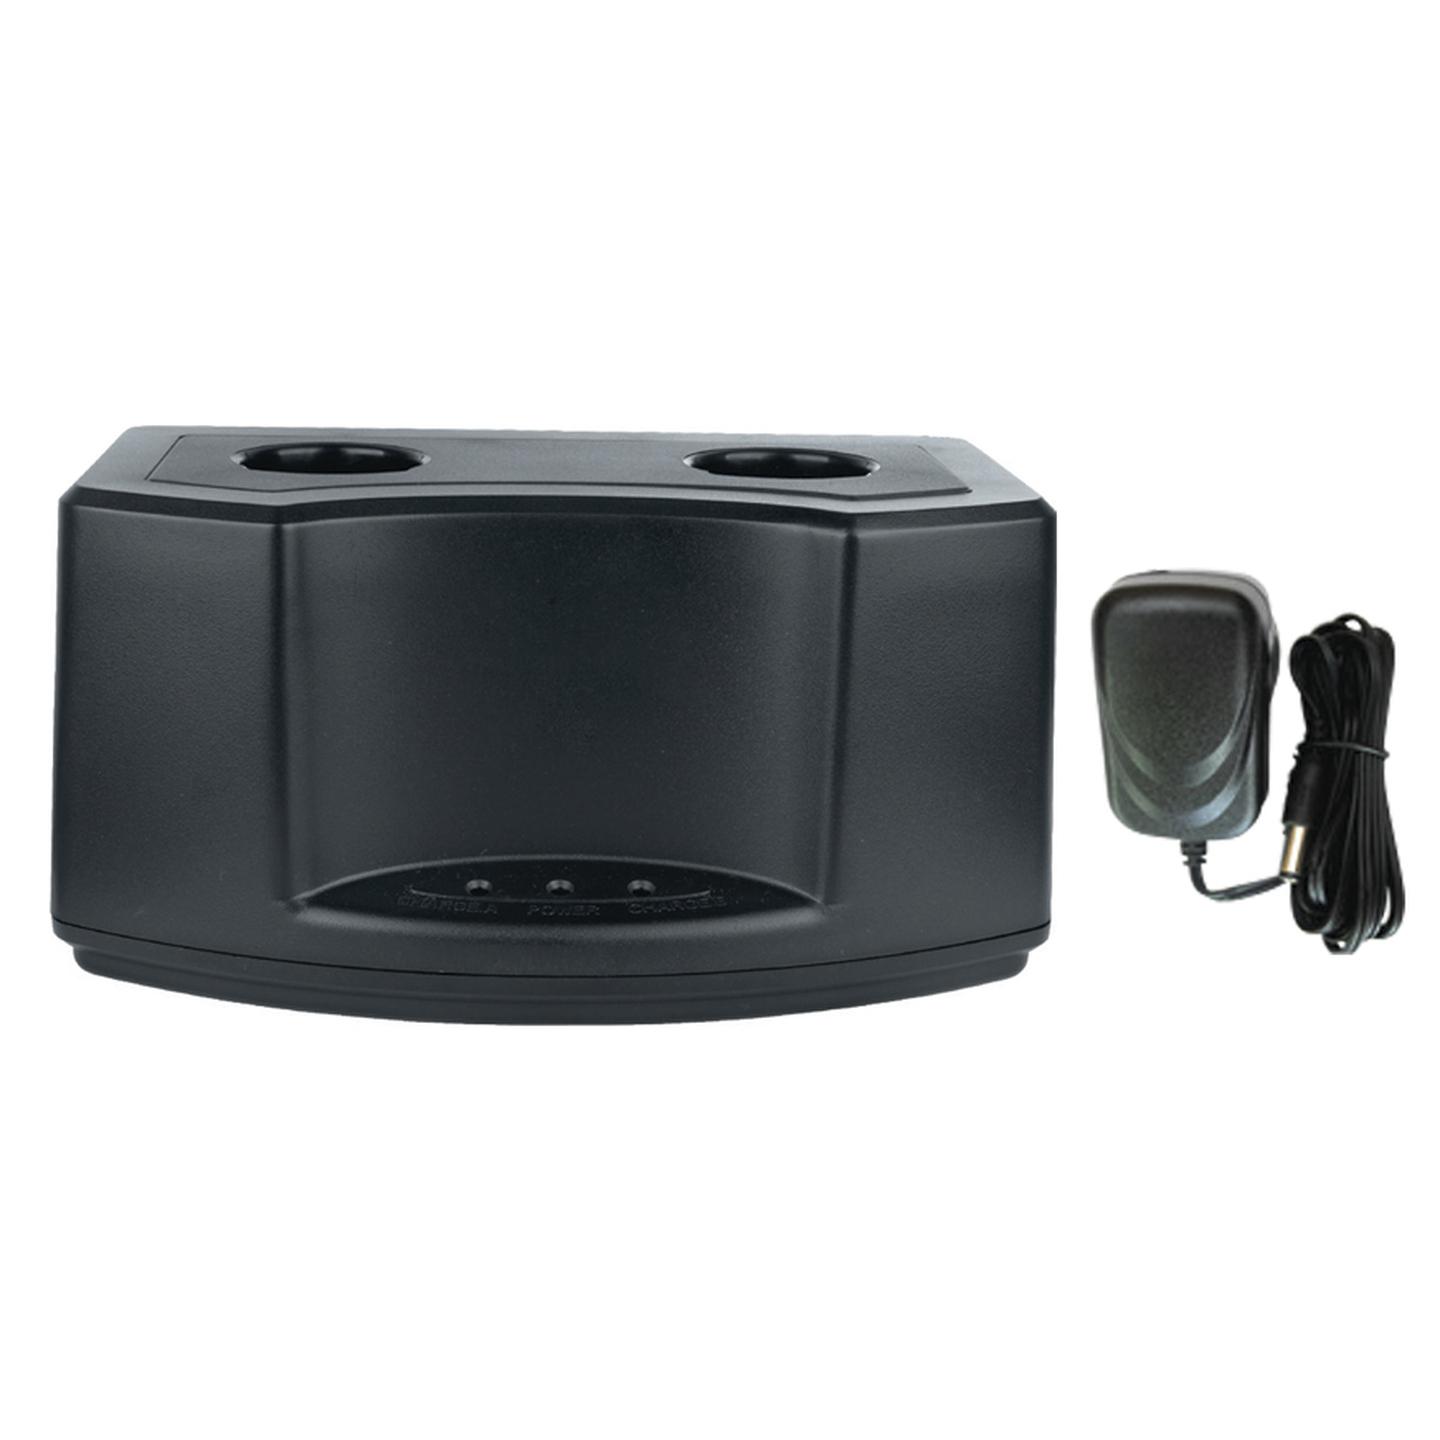 Dual Microphone Dock Charger and Battery to suit AM4155/60